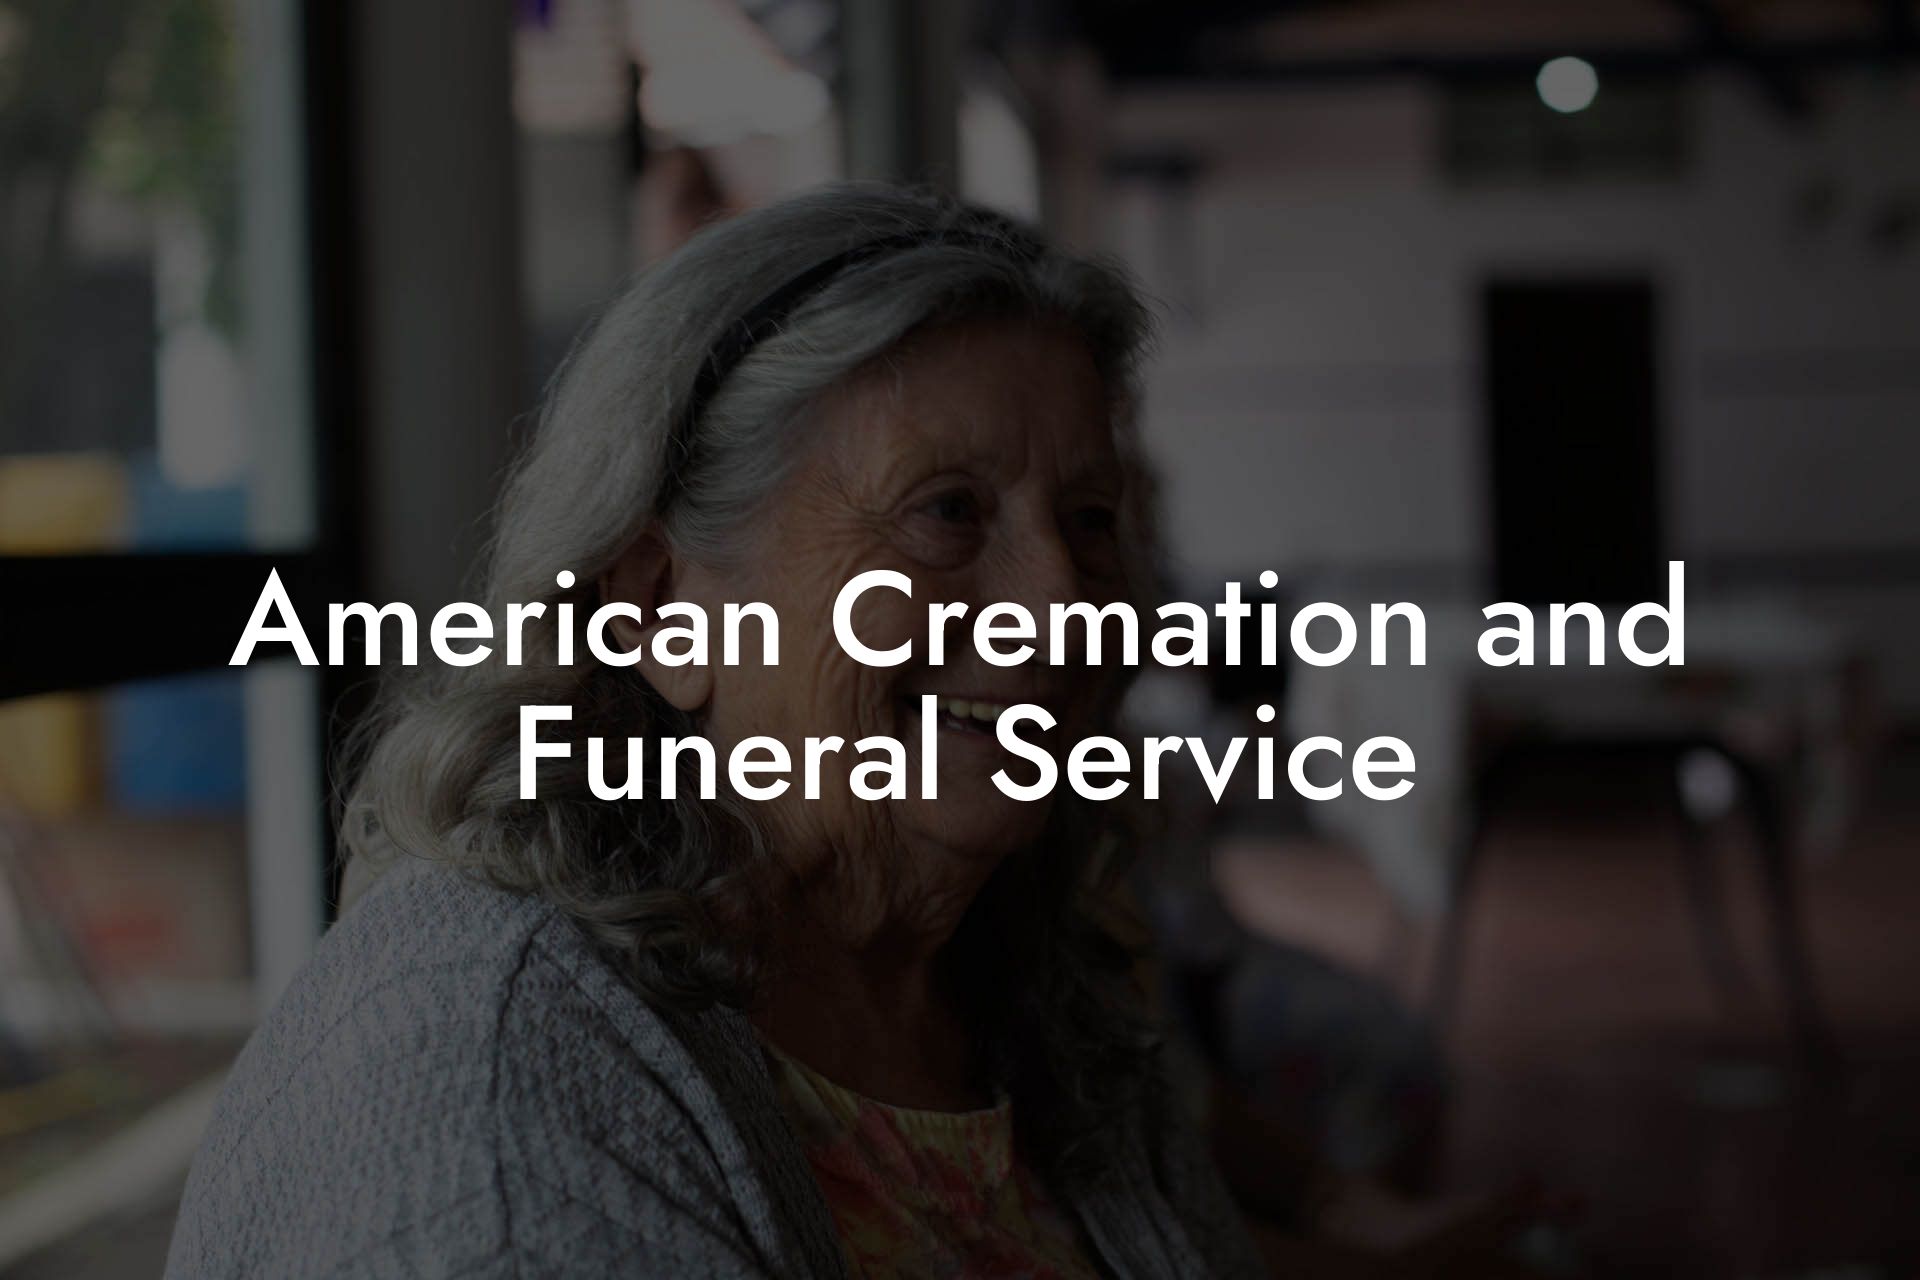 American Cremation and Funeral Service